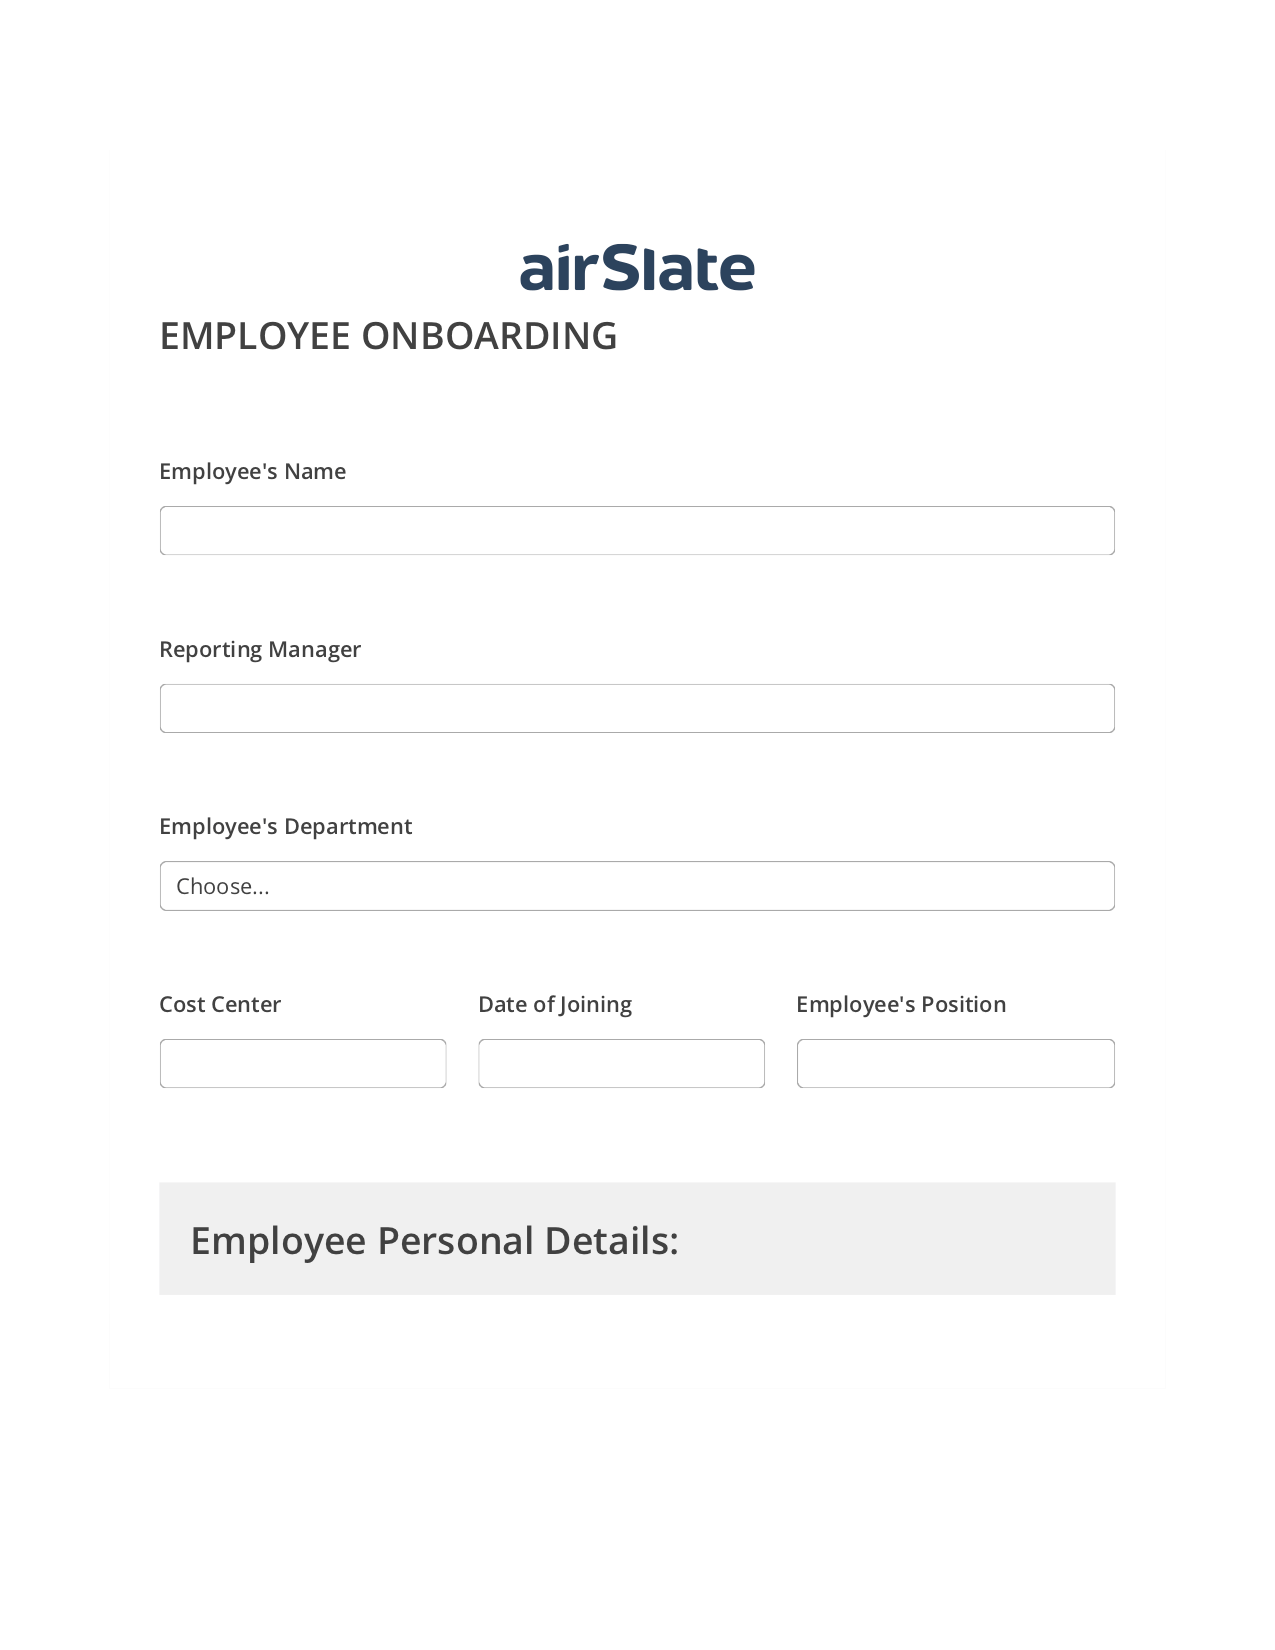 Employee Onboarding Workflow Prefill from NetSuite records, Email Notification Bot, Export to Excel 365 Bot